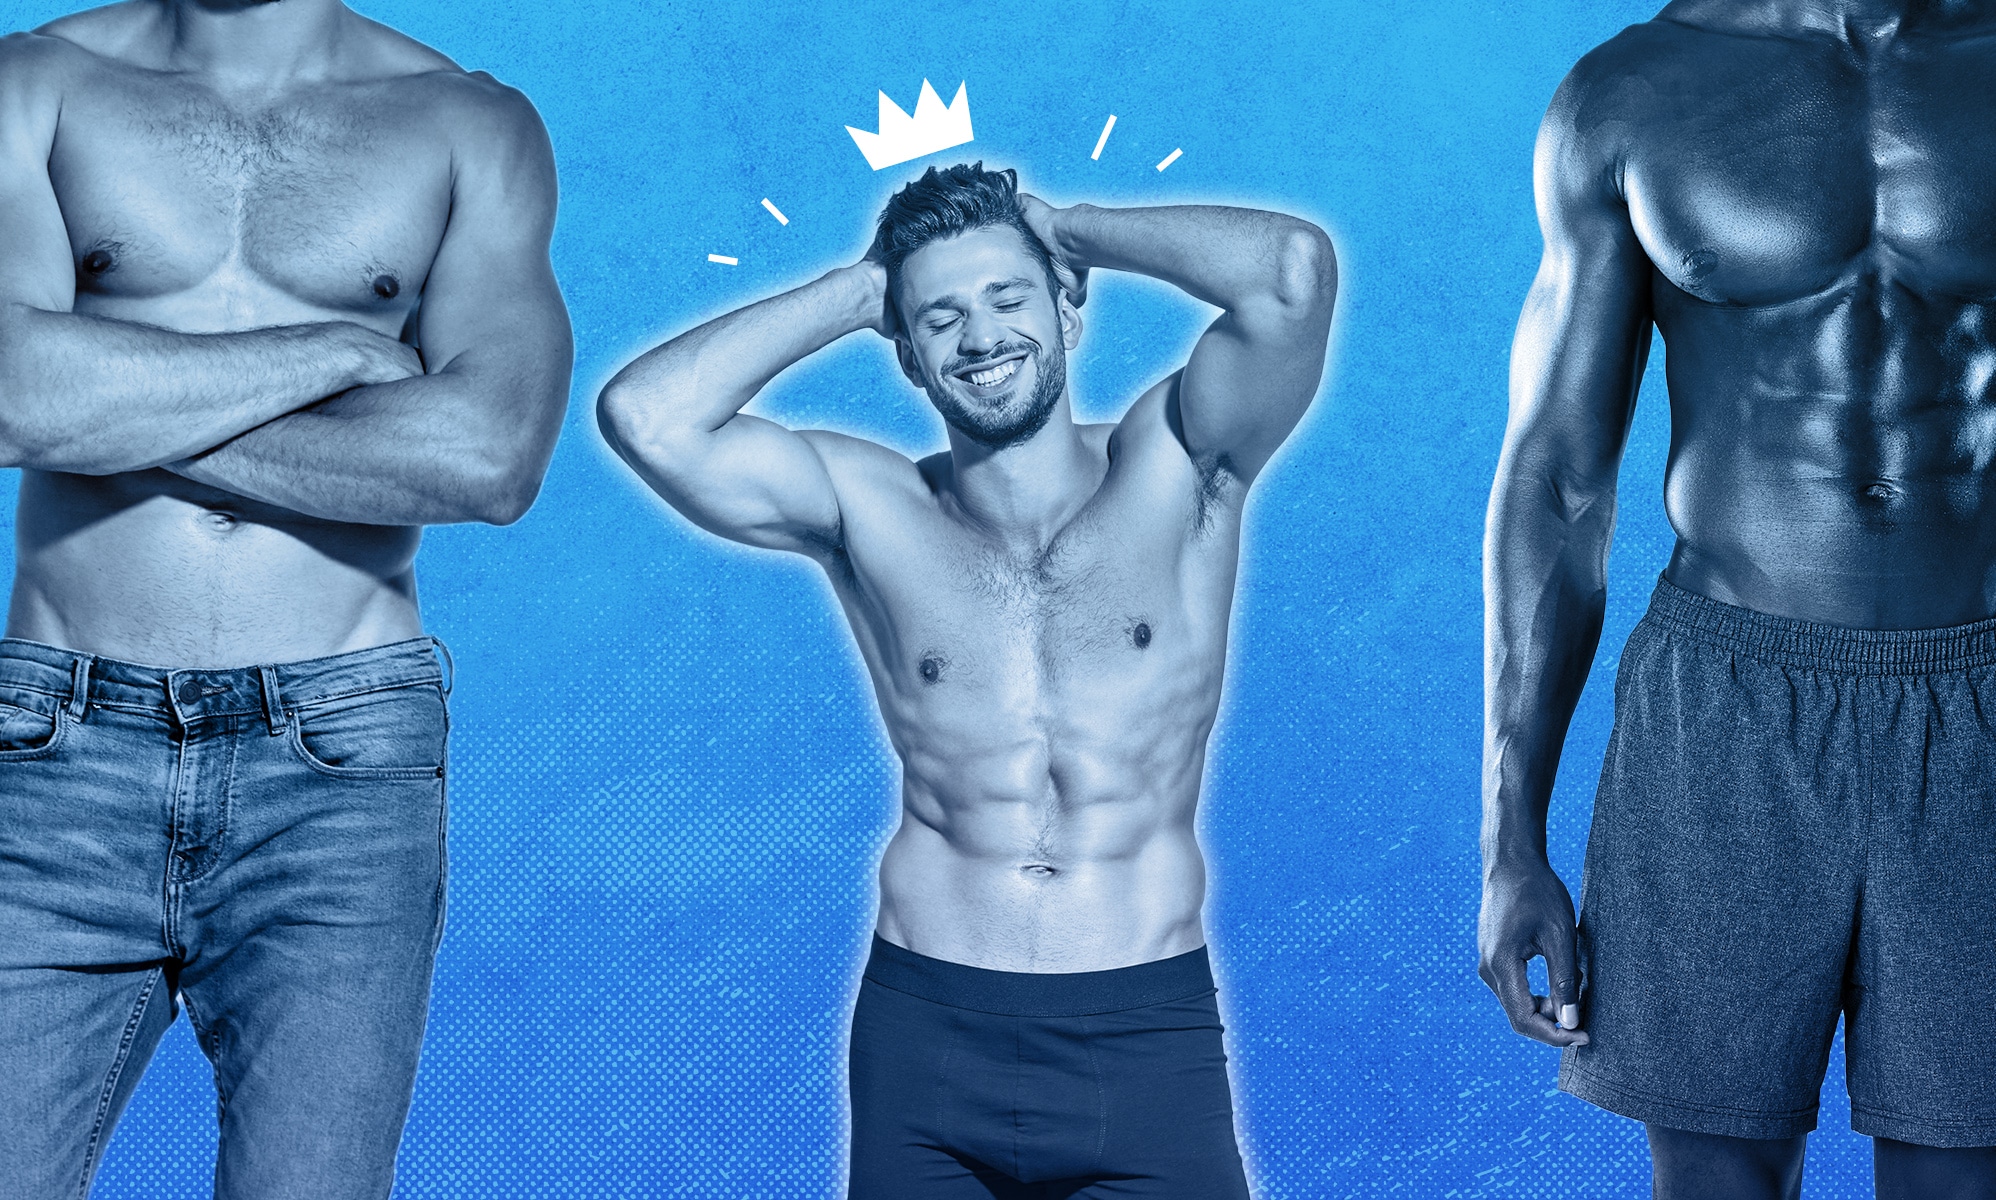 Why do men like to show their underwear? - Quora